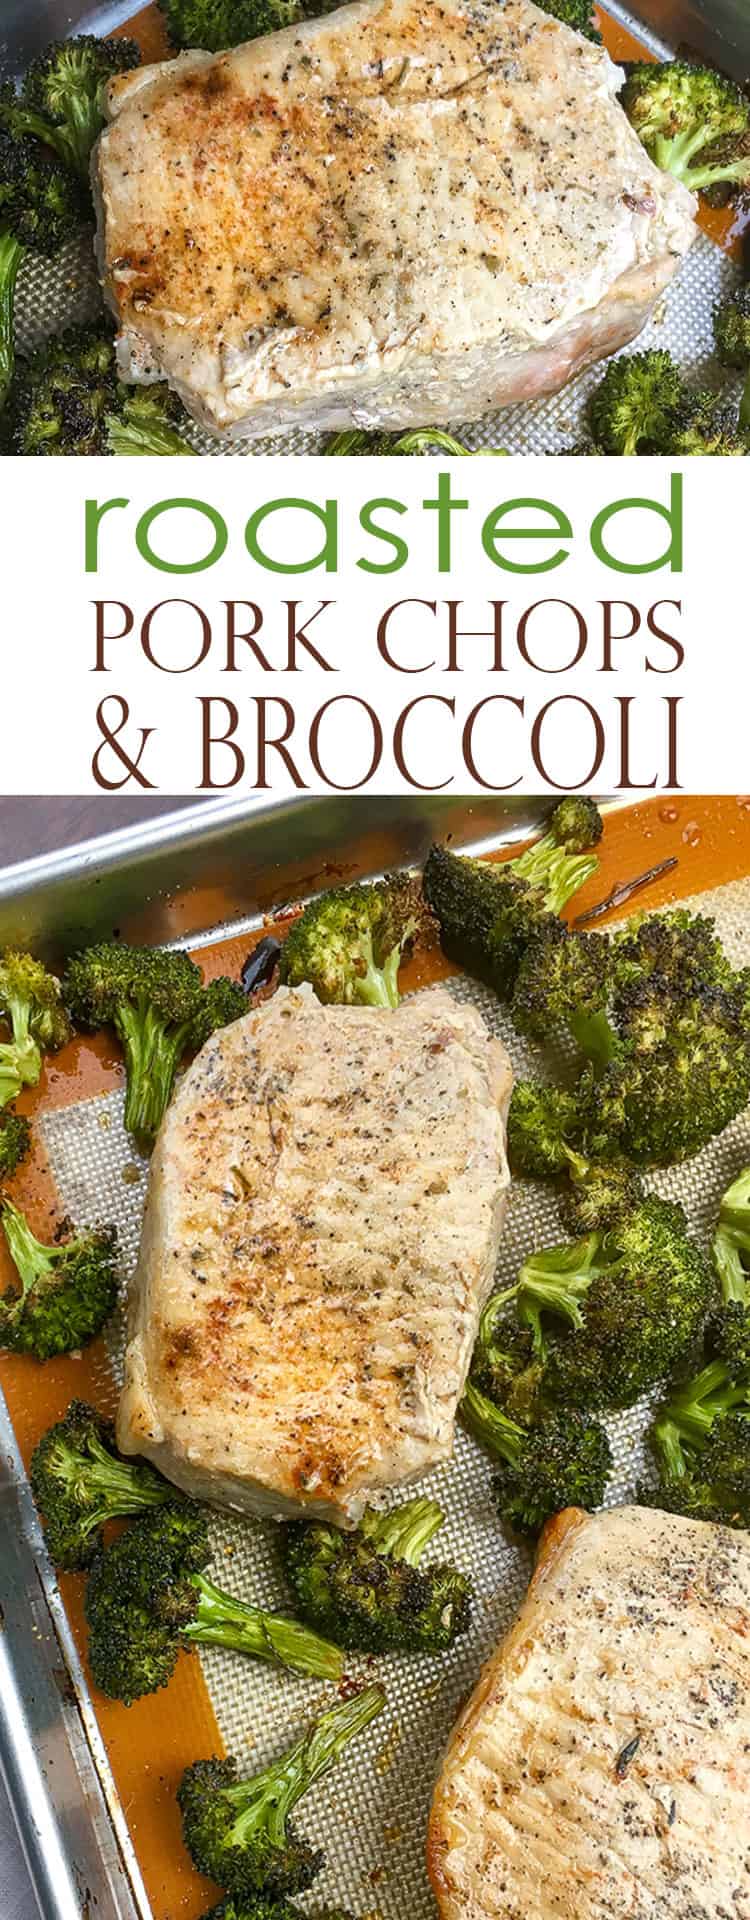 One-Pan Baked Pork Chops and Broccoli | All She Cooks